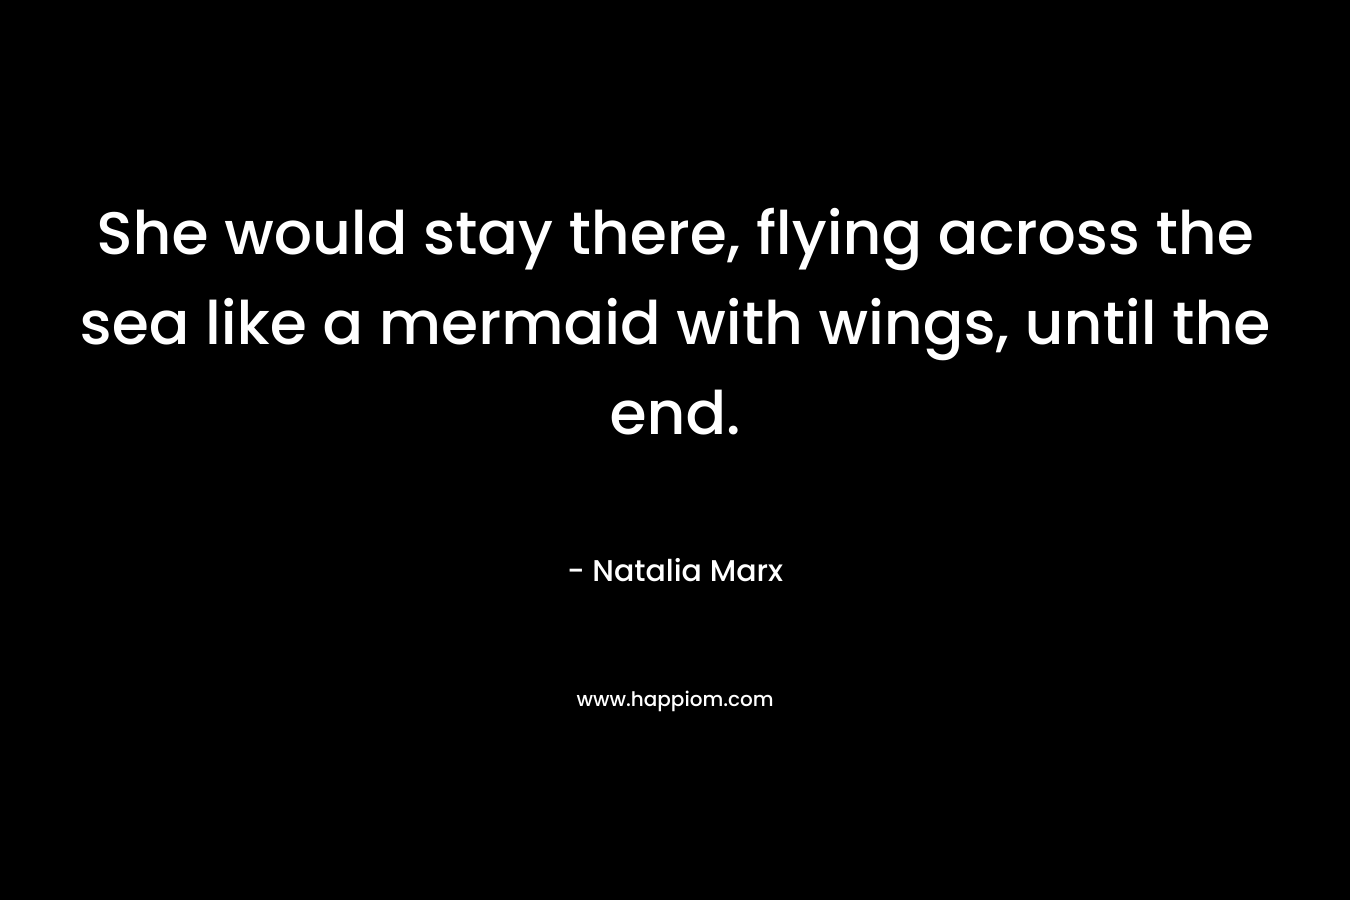 She would stay there, flying across the sea like a mermaid with wings, until the end. – Natalia Marx